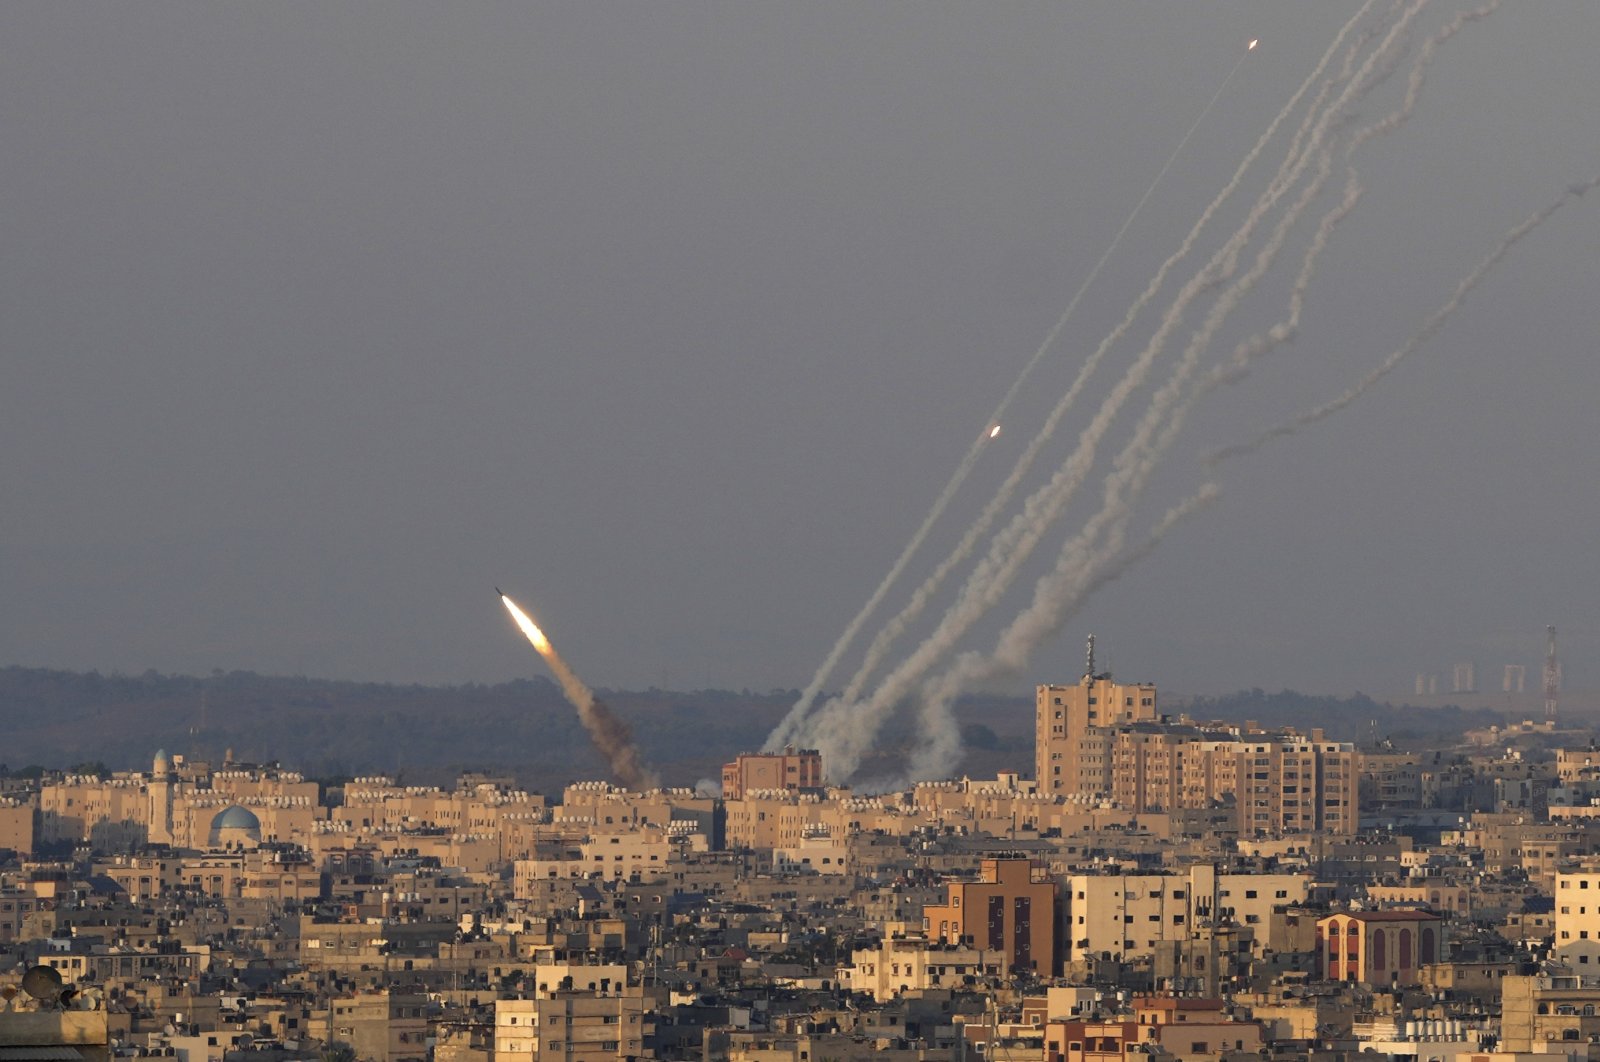 Rockets are launched from the Gaza Strip in retaliation for the latest Israeli attacks, in Gaza City, Palestine, Aug. 7, 2022. (AP Photo)